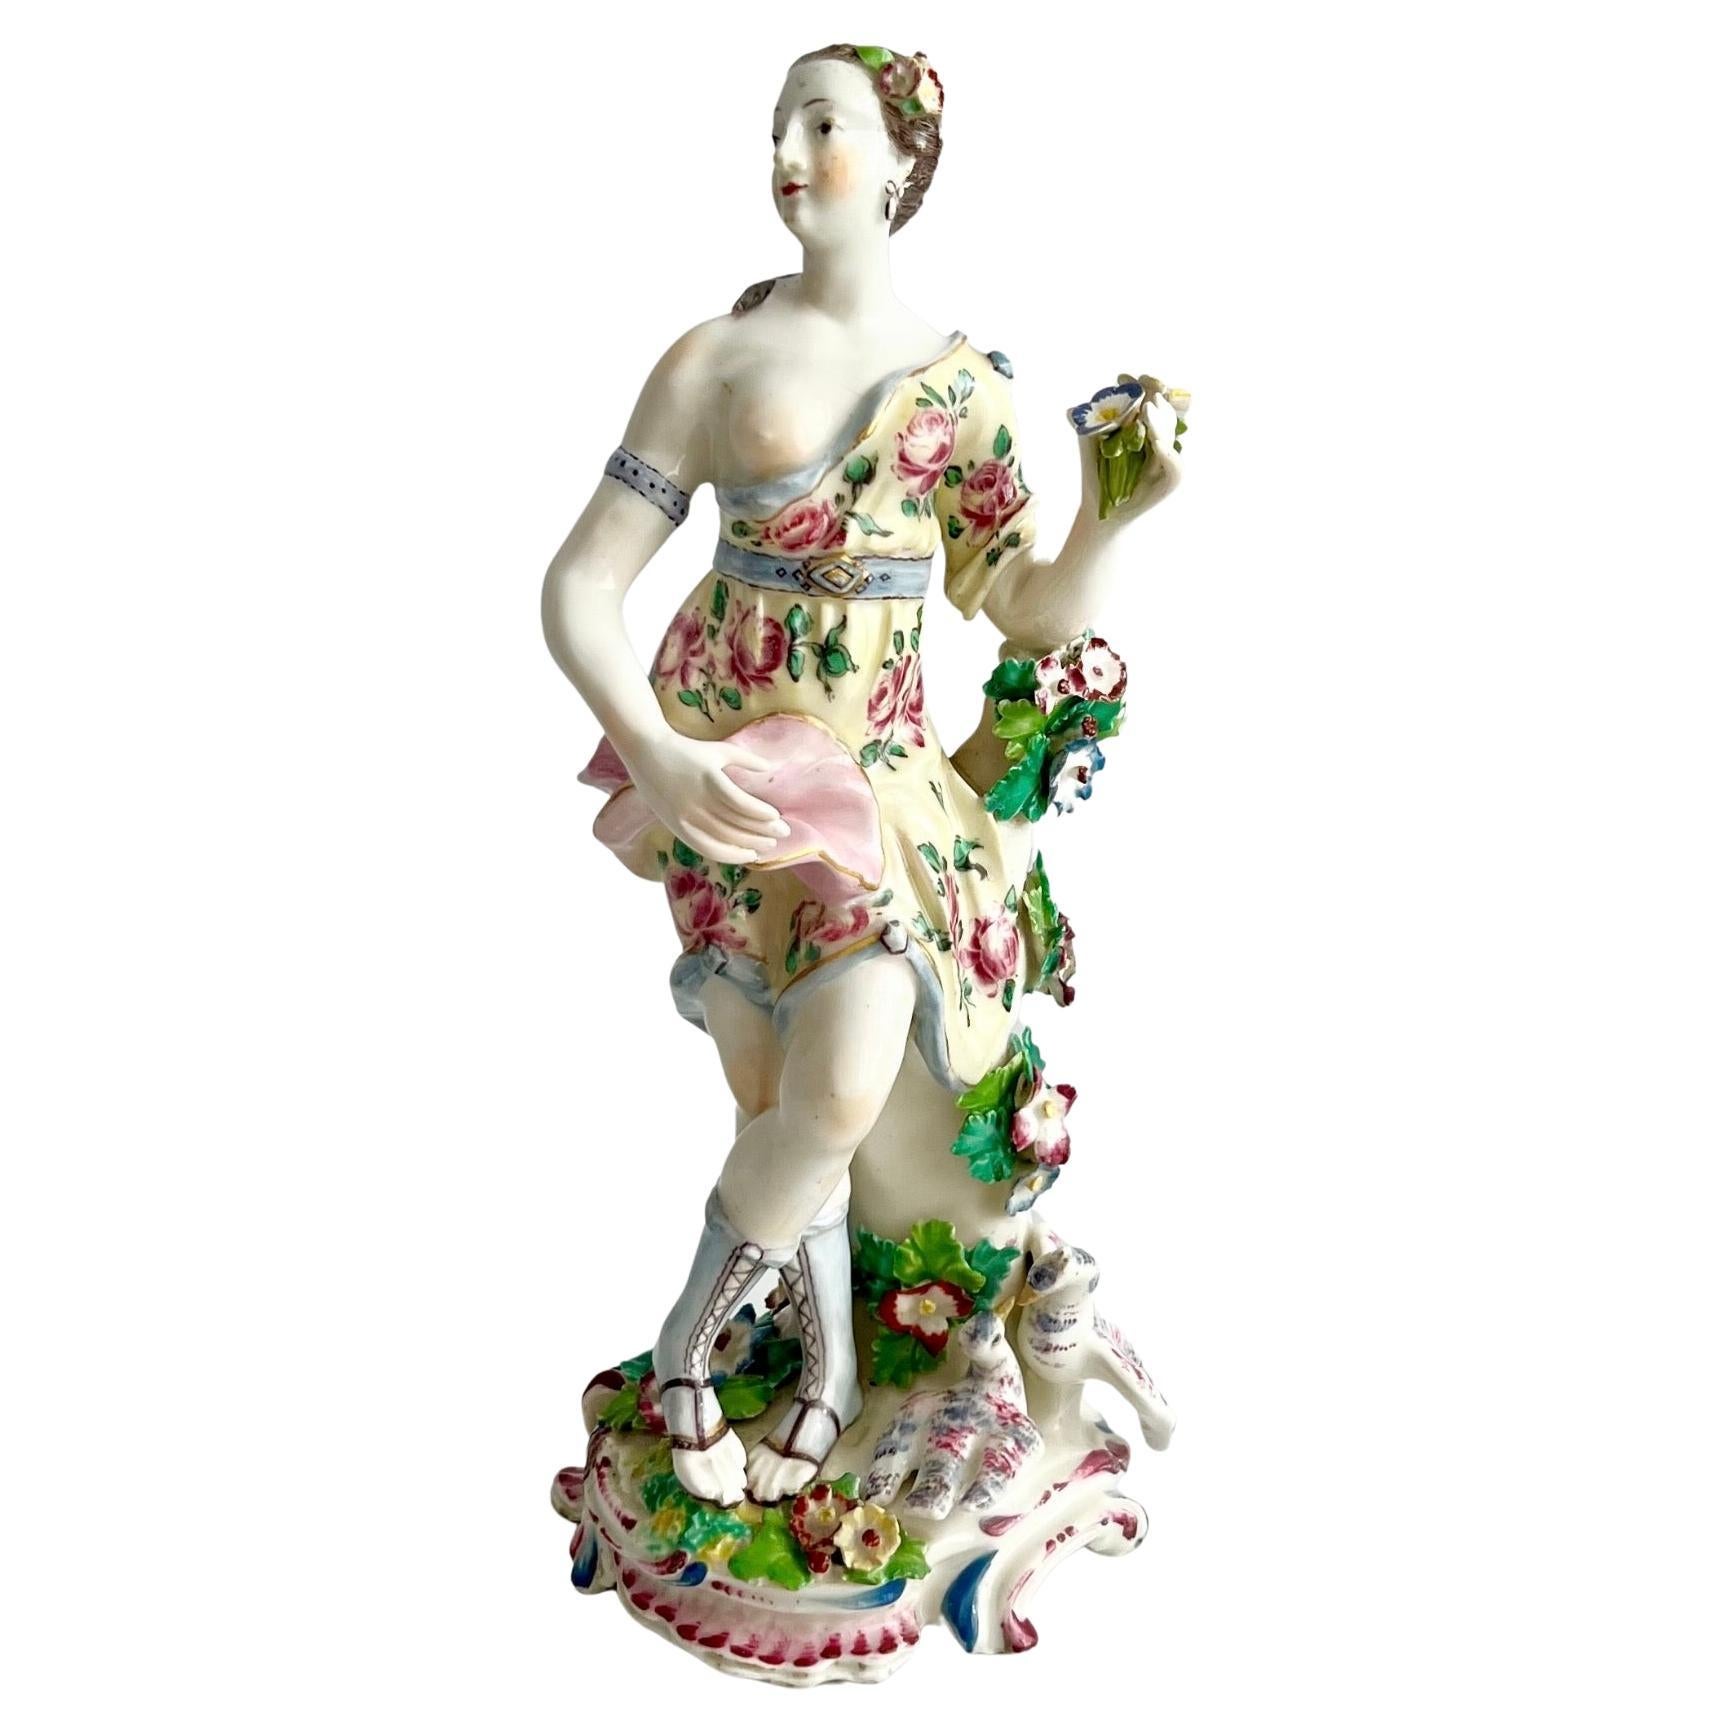 Bow Porcelain Figure of Venus with Doves, Rococo, 1756-1764